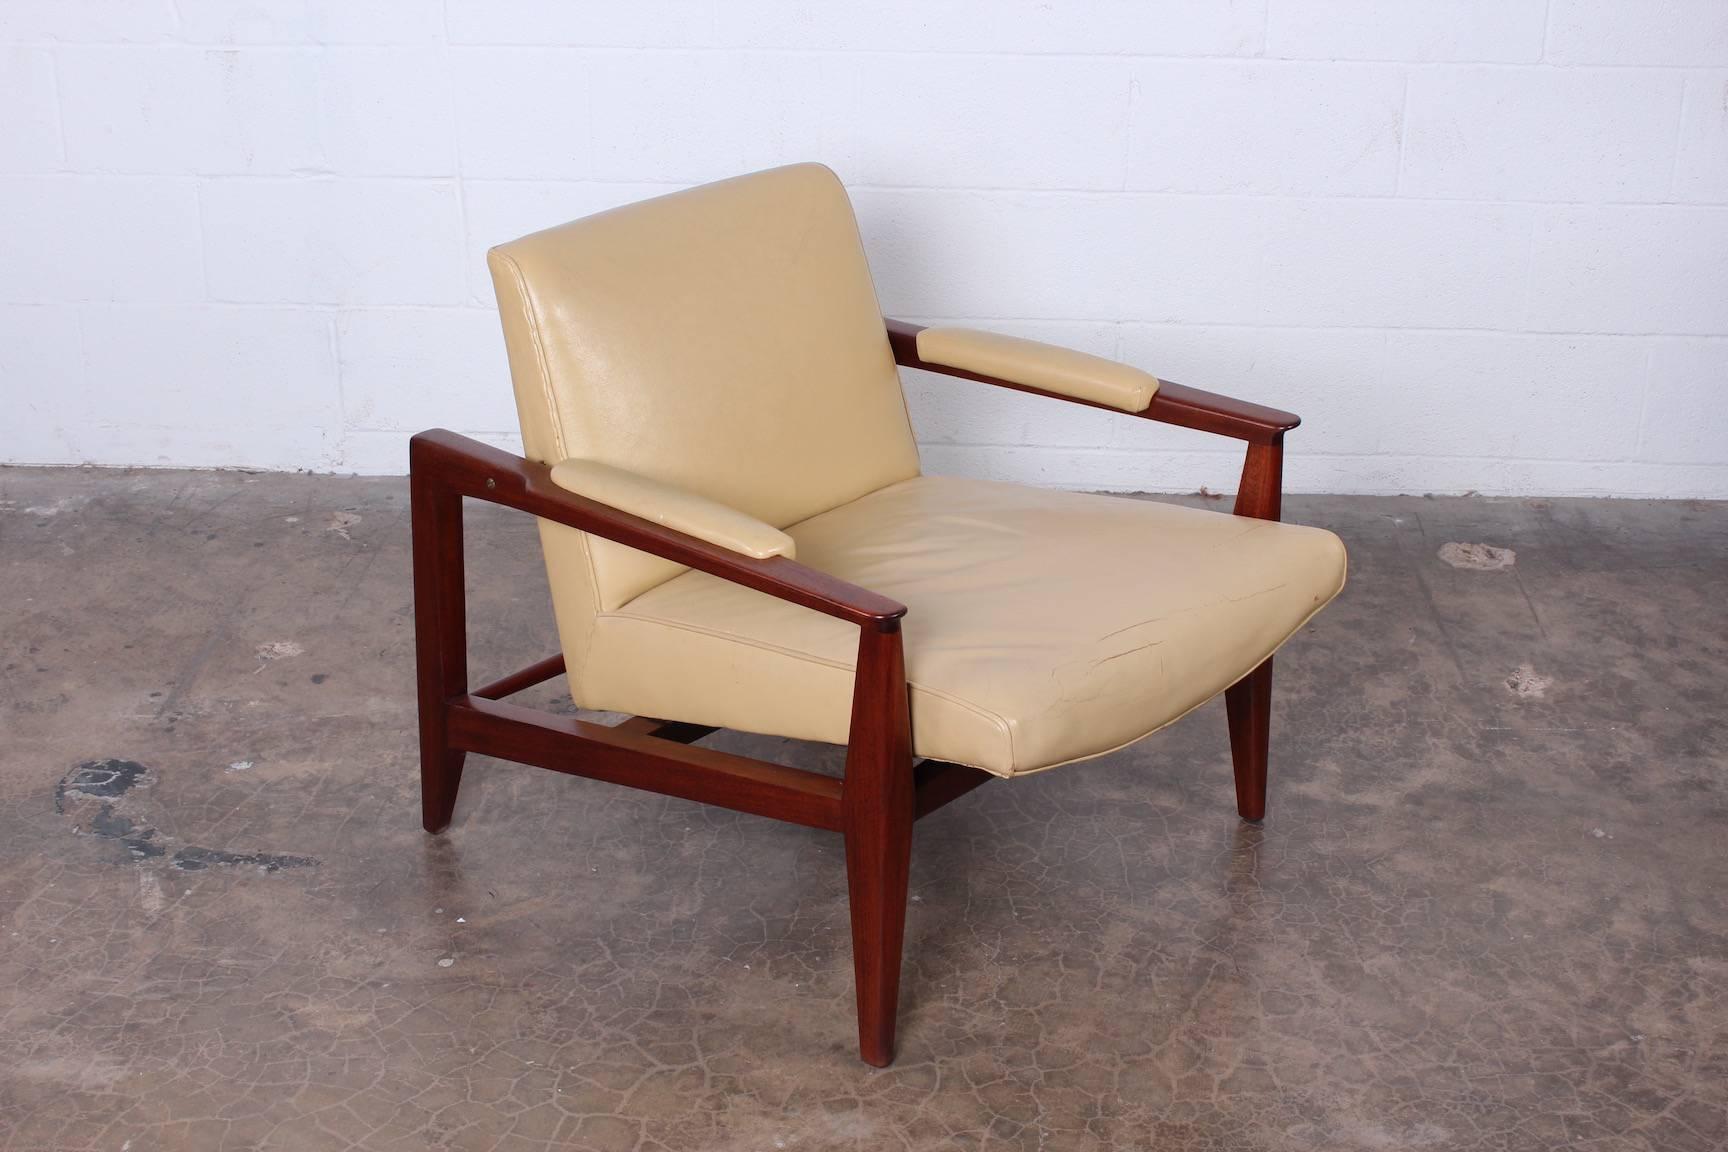 A mahogany lounge chair with original leather upholstery. Designed by Edward Wormley for Dunbar.